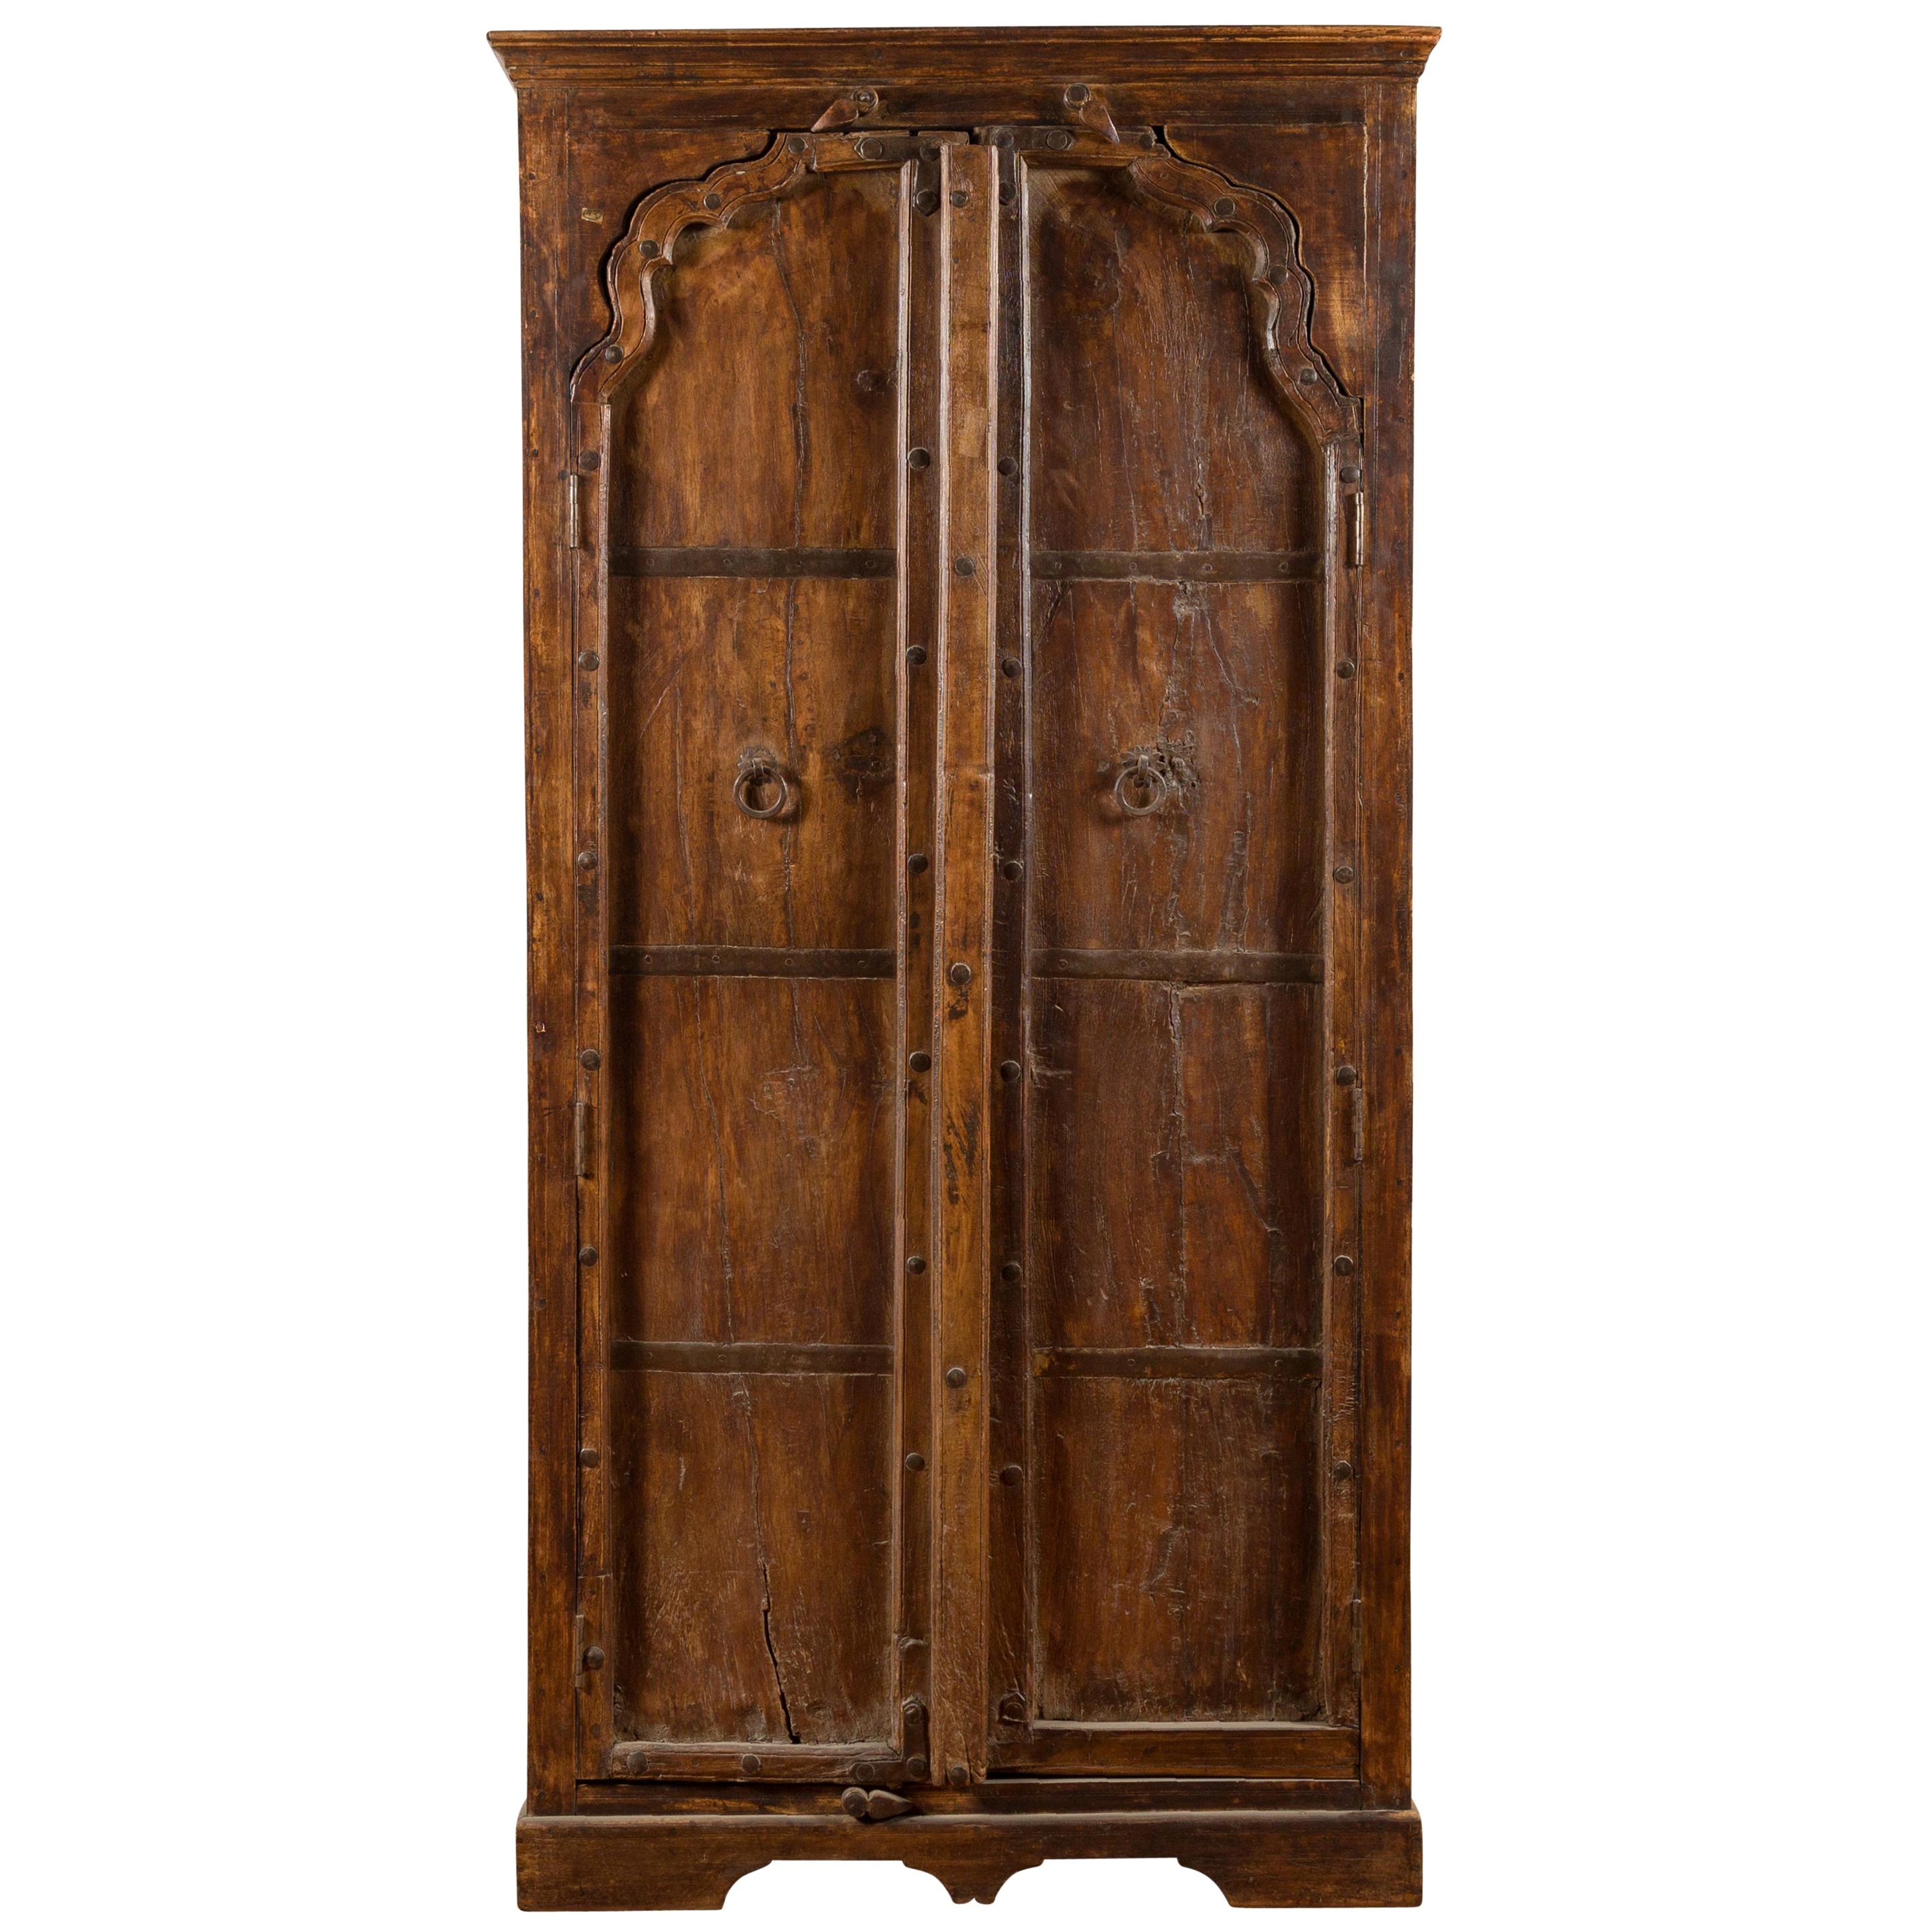 Indian 19th Century Carved Sheesham Wood Cabinet with Iron Hardware from Gujarat